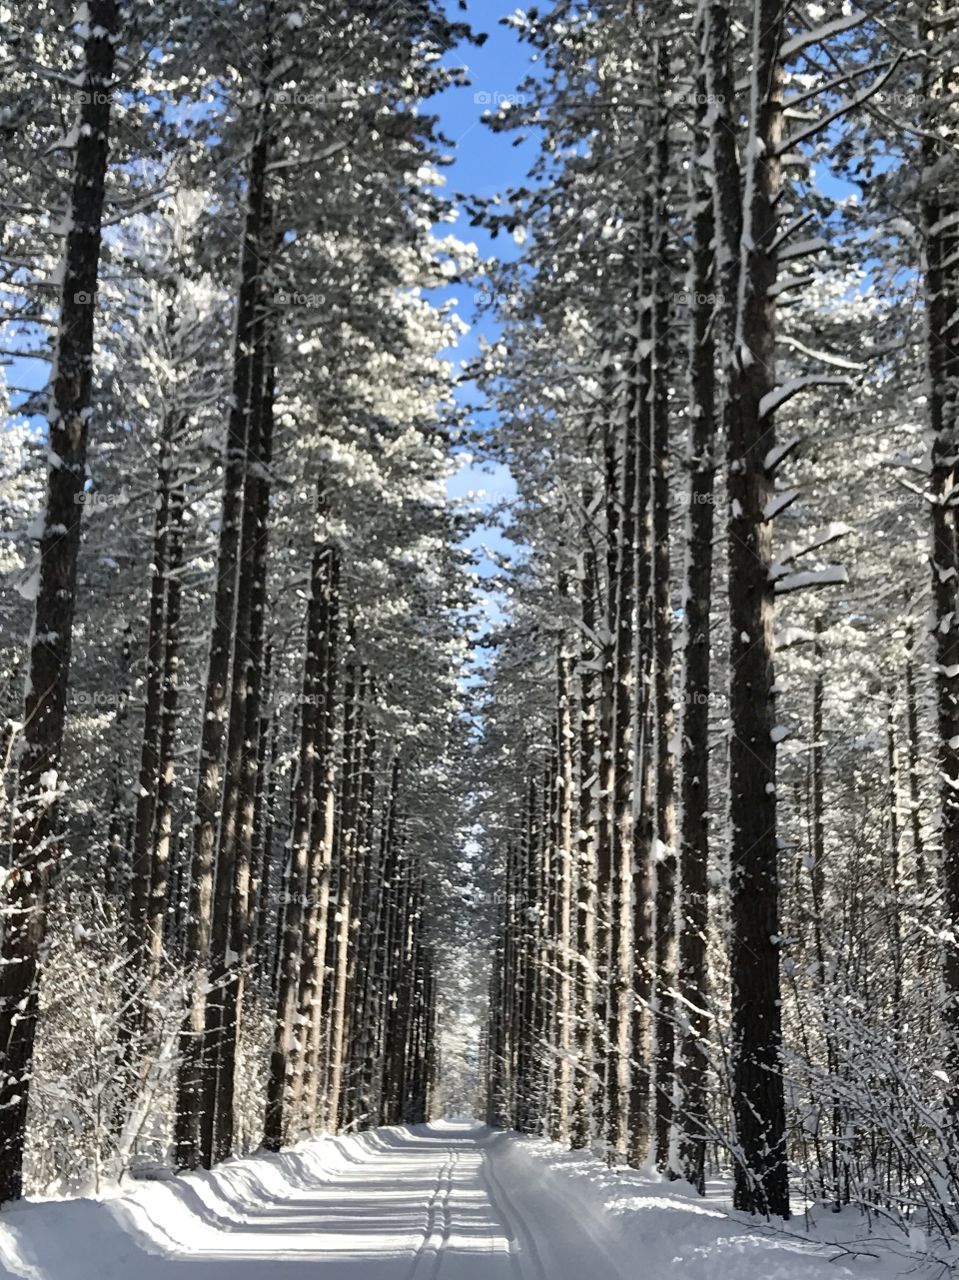 Majestic pines lead the way